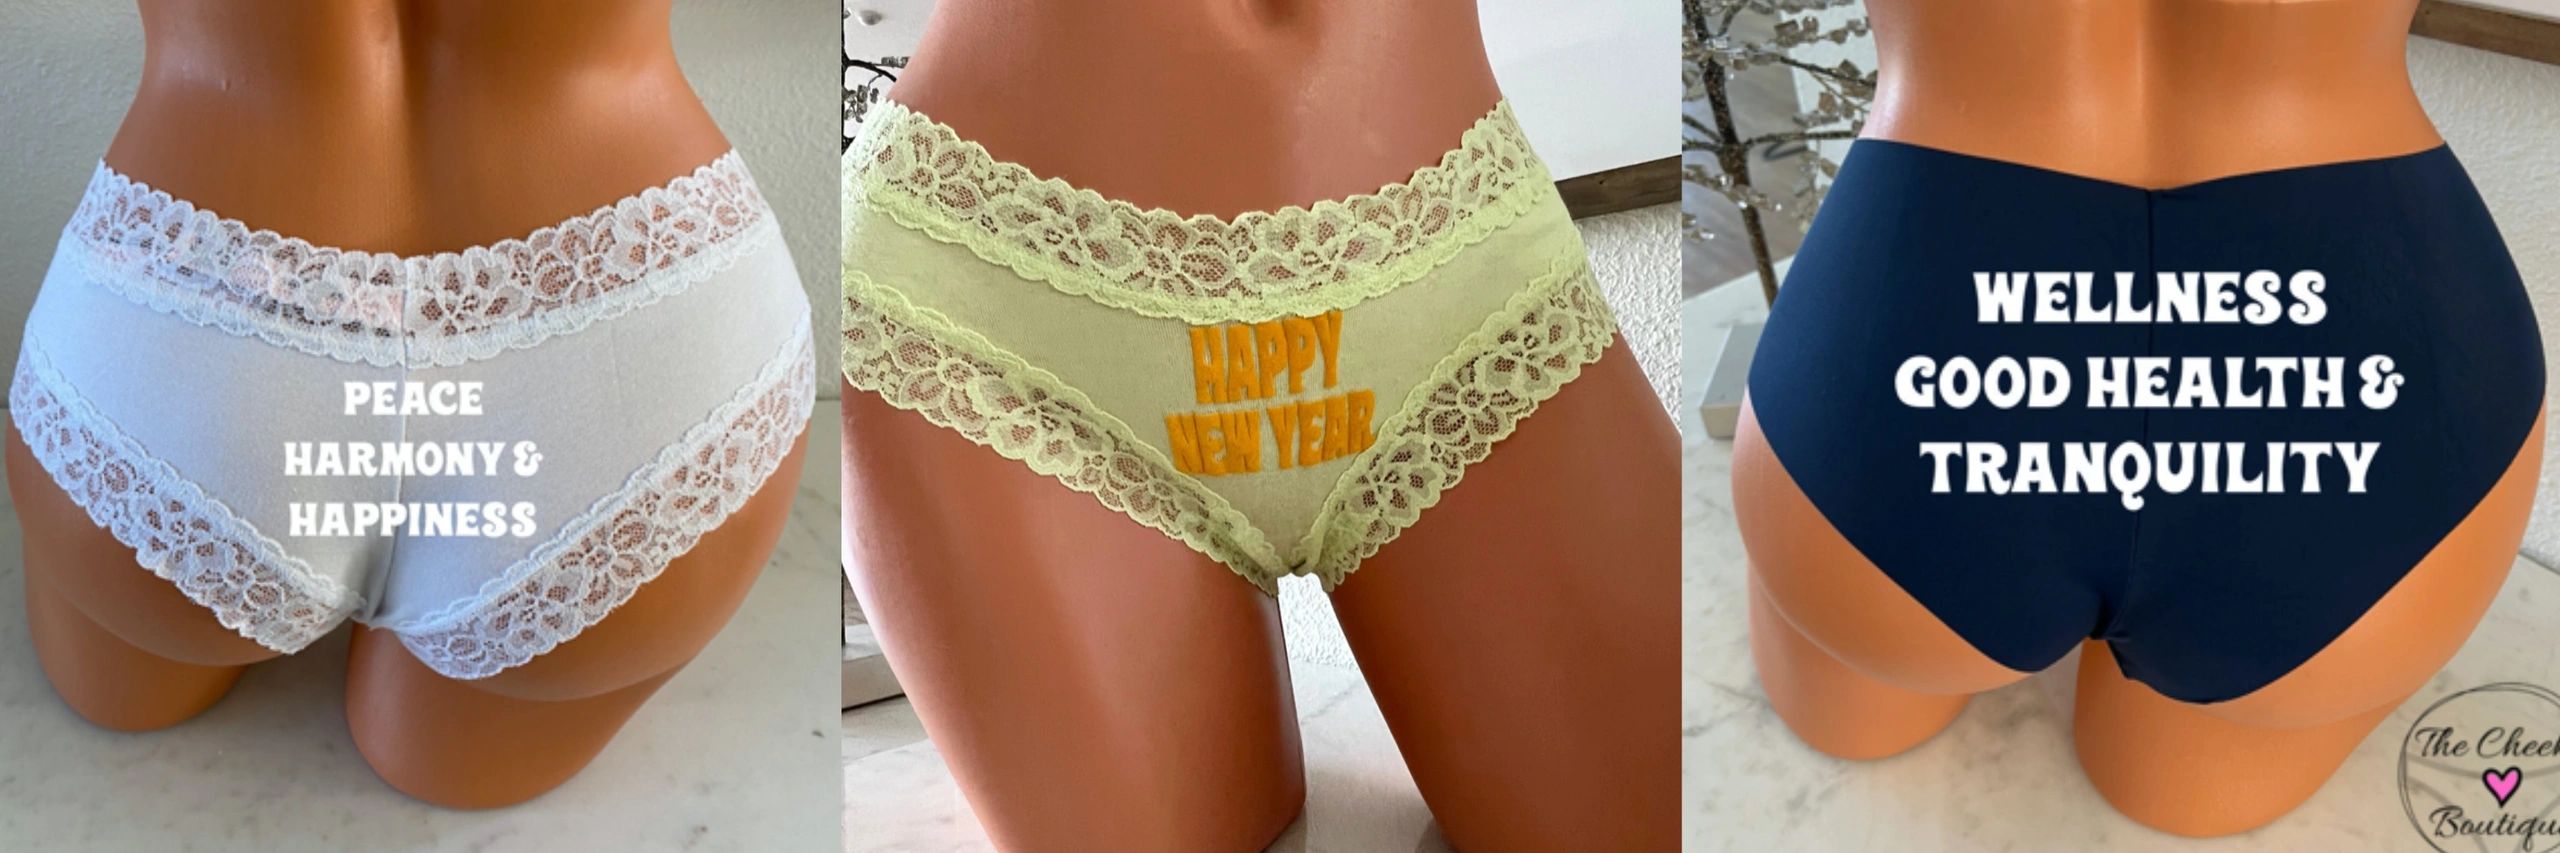 New Year's Eve Underwear Colour Meaning